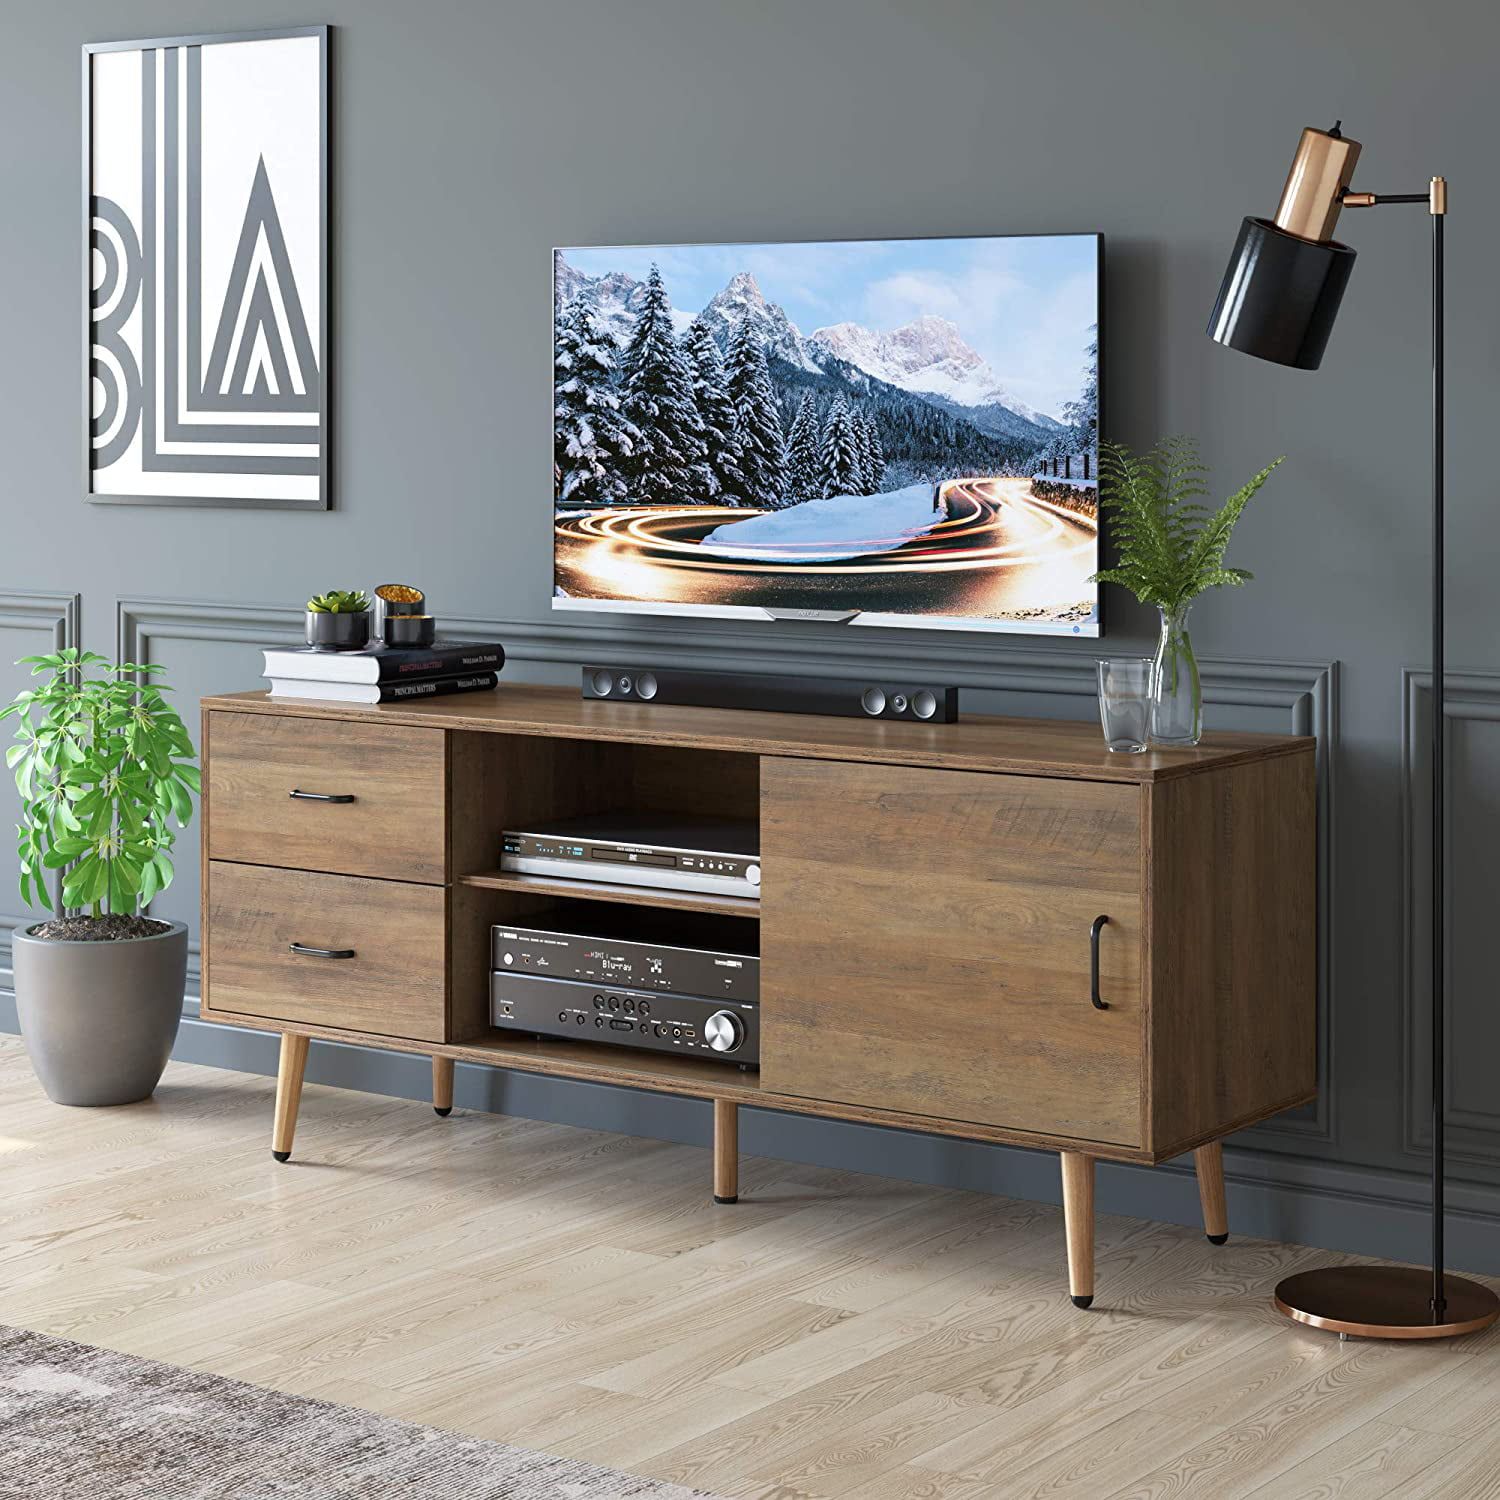 Homfa Tv Cabinet Media Console Table, Wood Tv Stand For Tvs Up To 60 With Regard To Cafe Tv Stands With Storage (View 6 of 20)